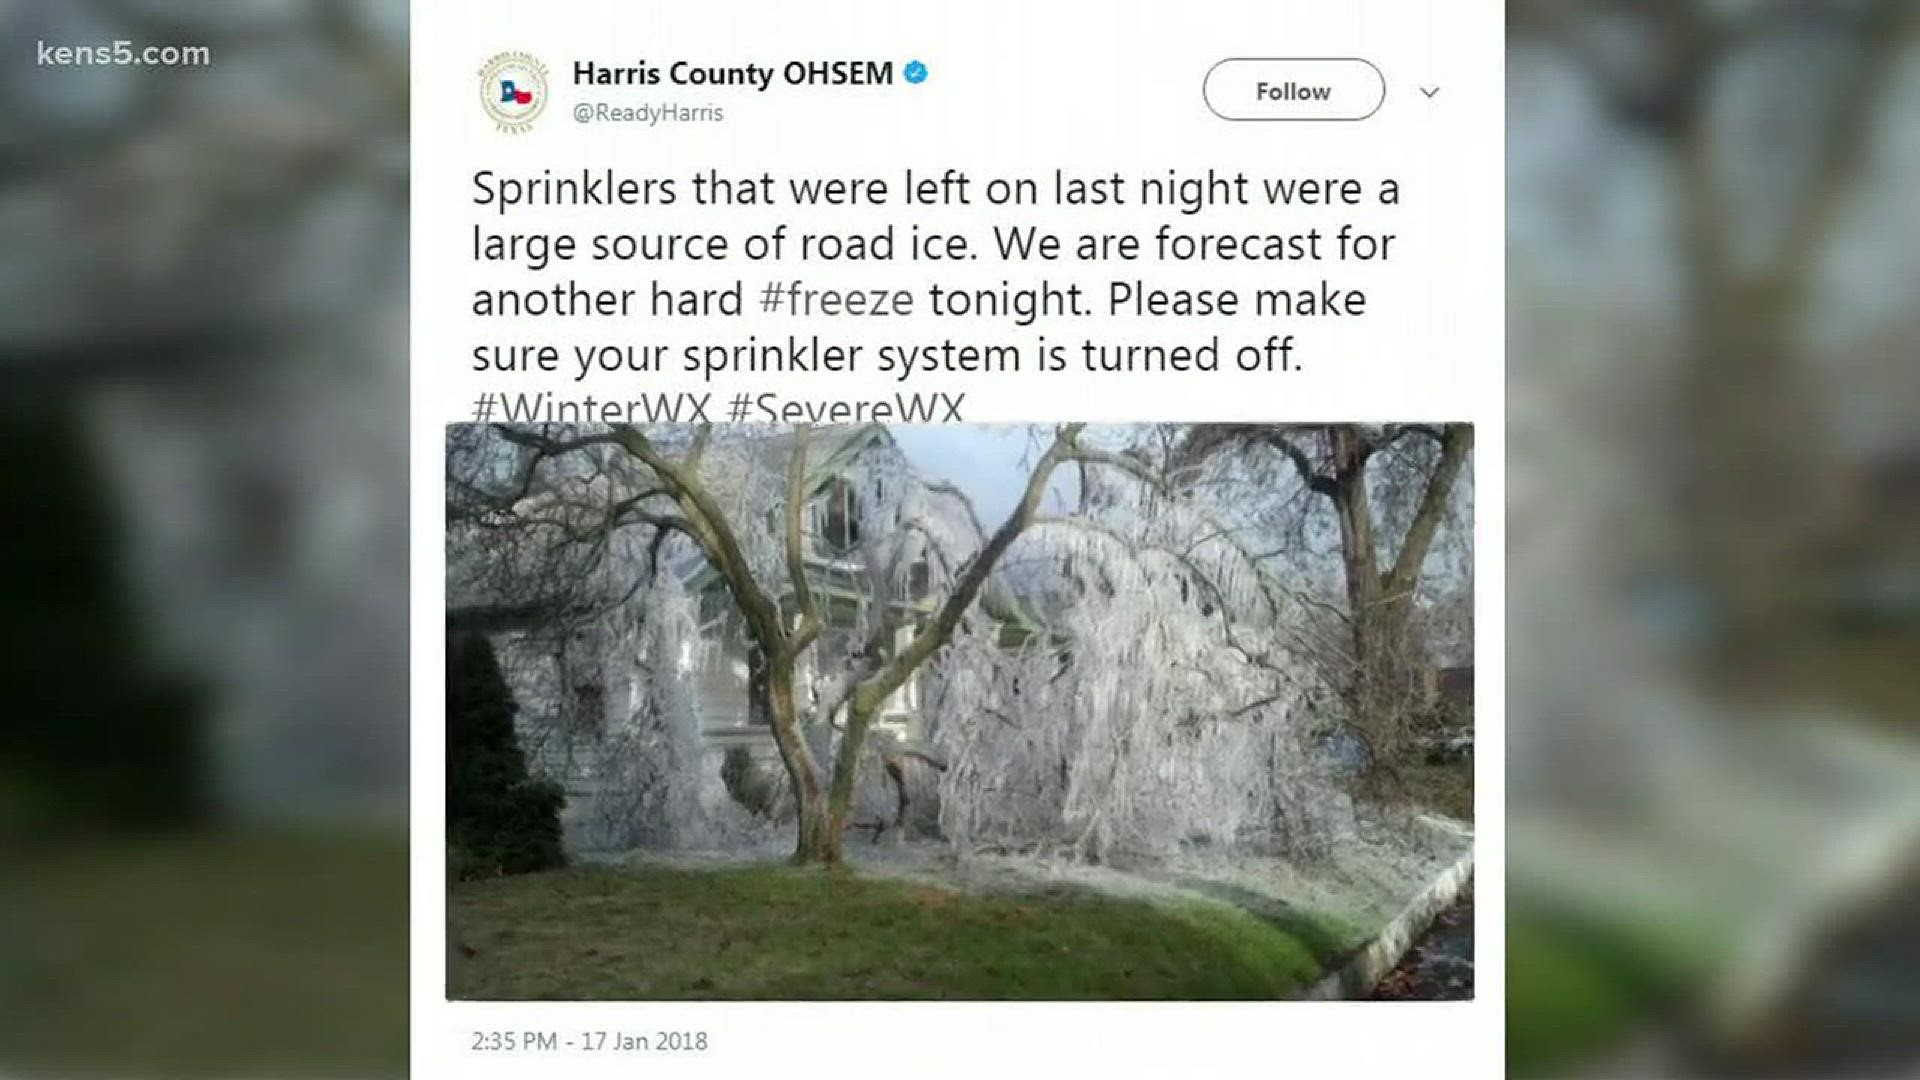 You could be surrounded by ice if you forget to turn your sprinklers off during a hard freeze.